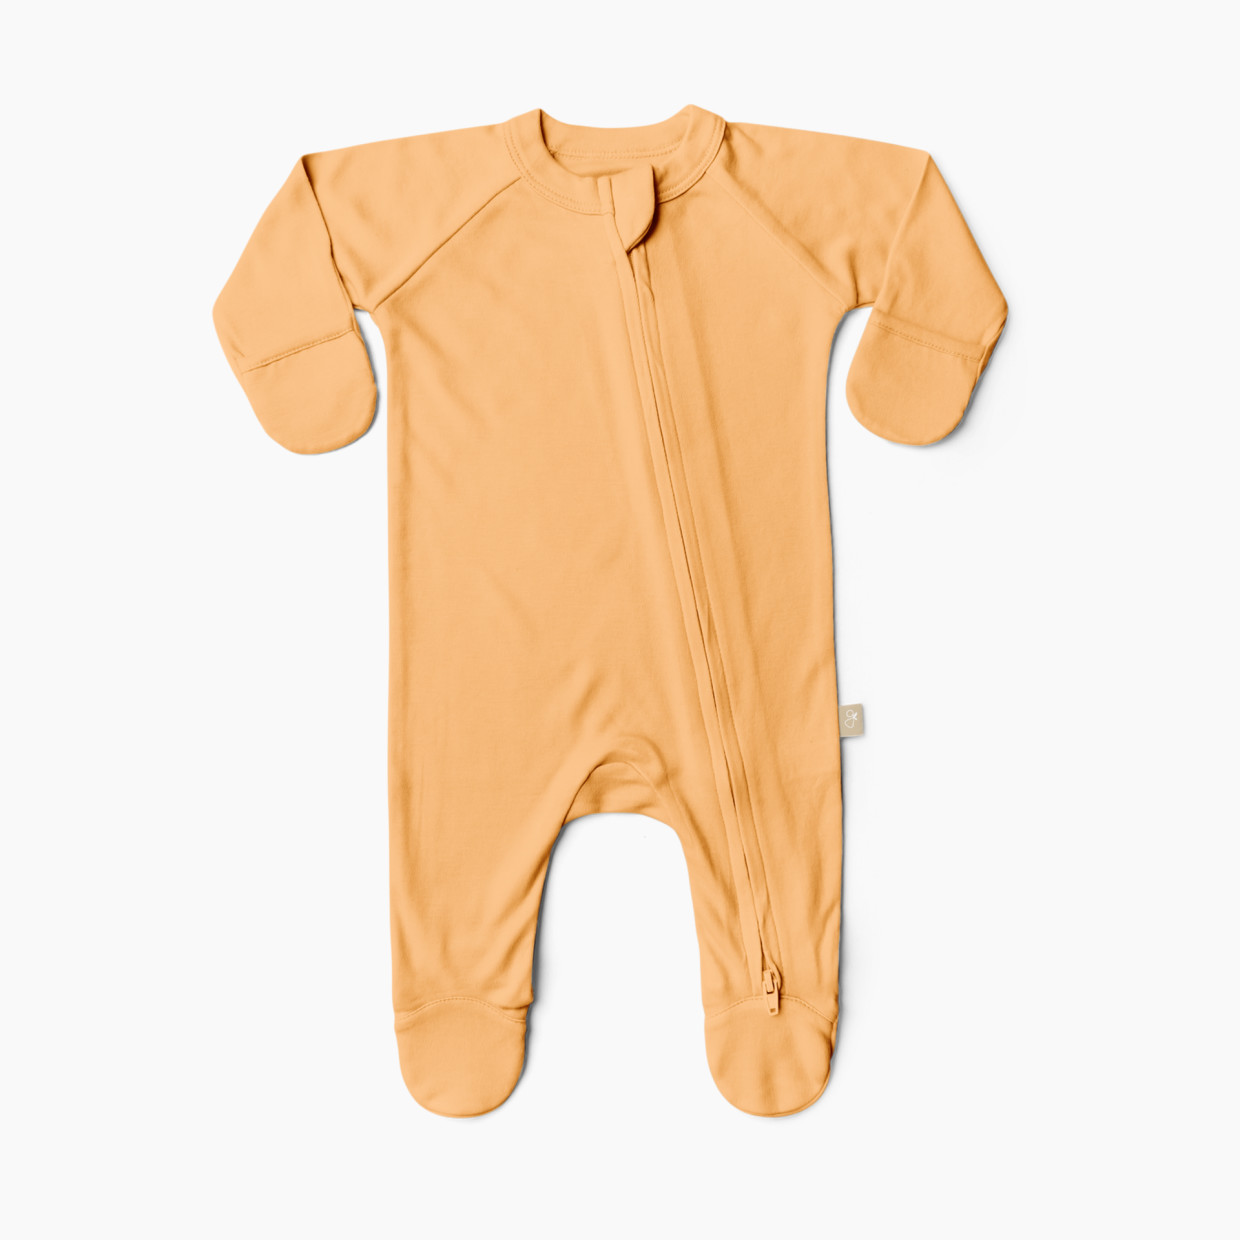 Goumi Kids x Babylist Grow With You Footie - Loose Fit - Honey, 0-3 M.